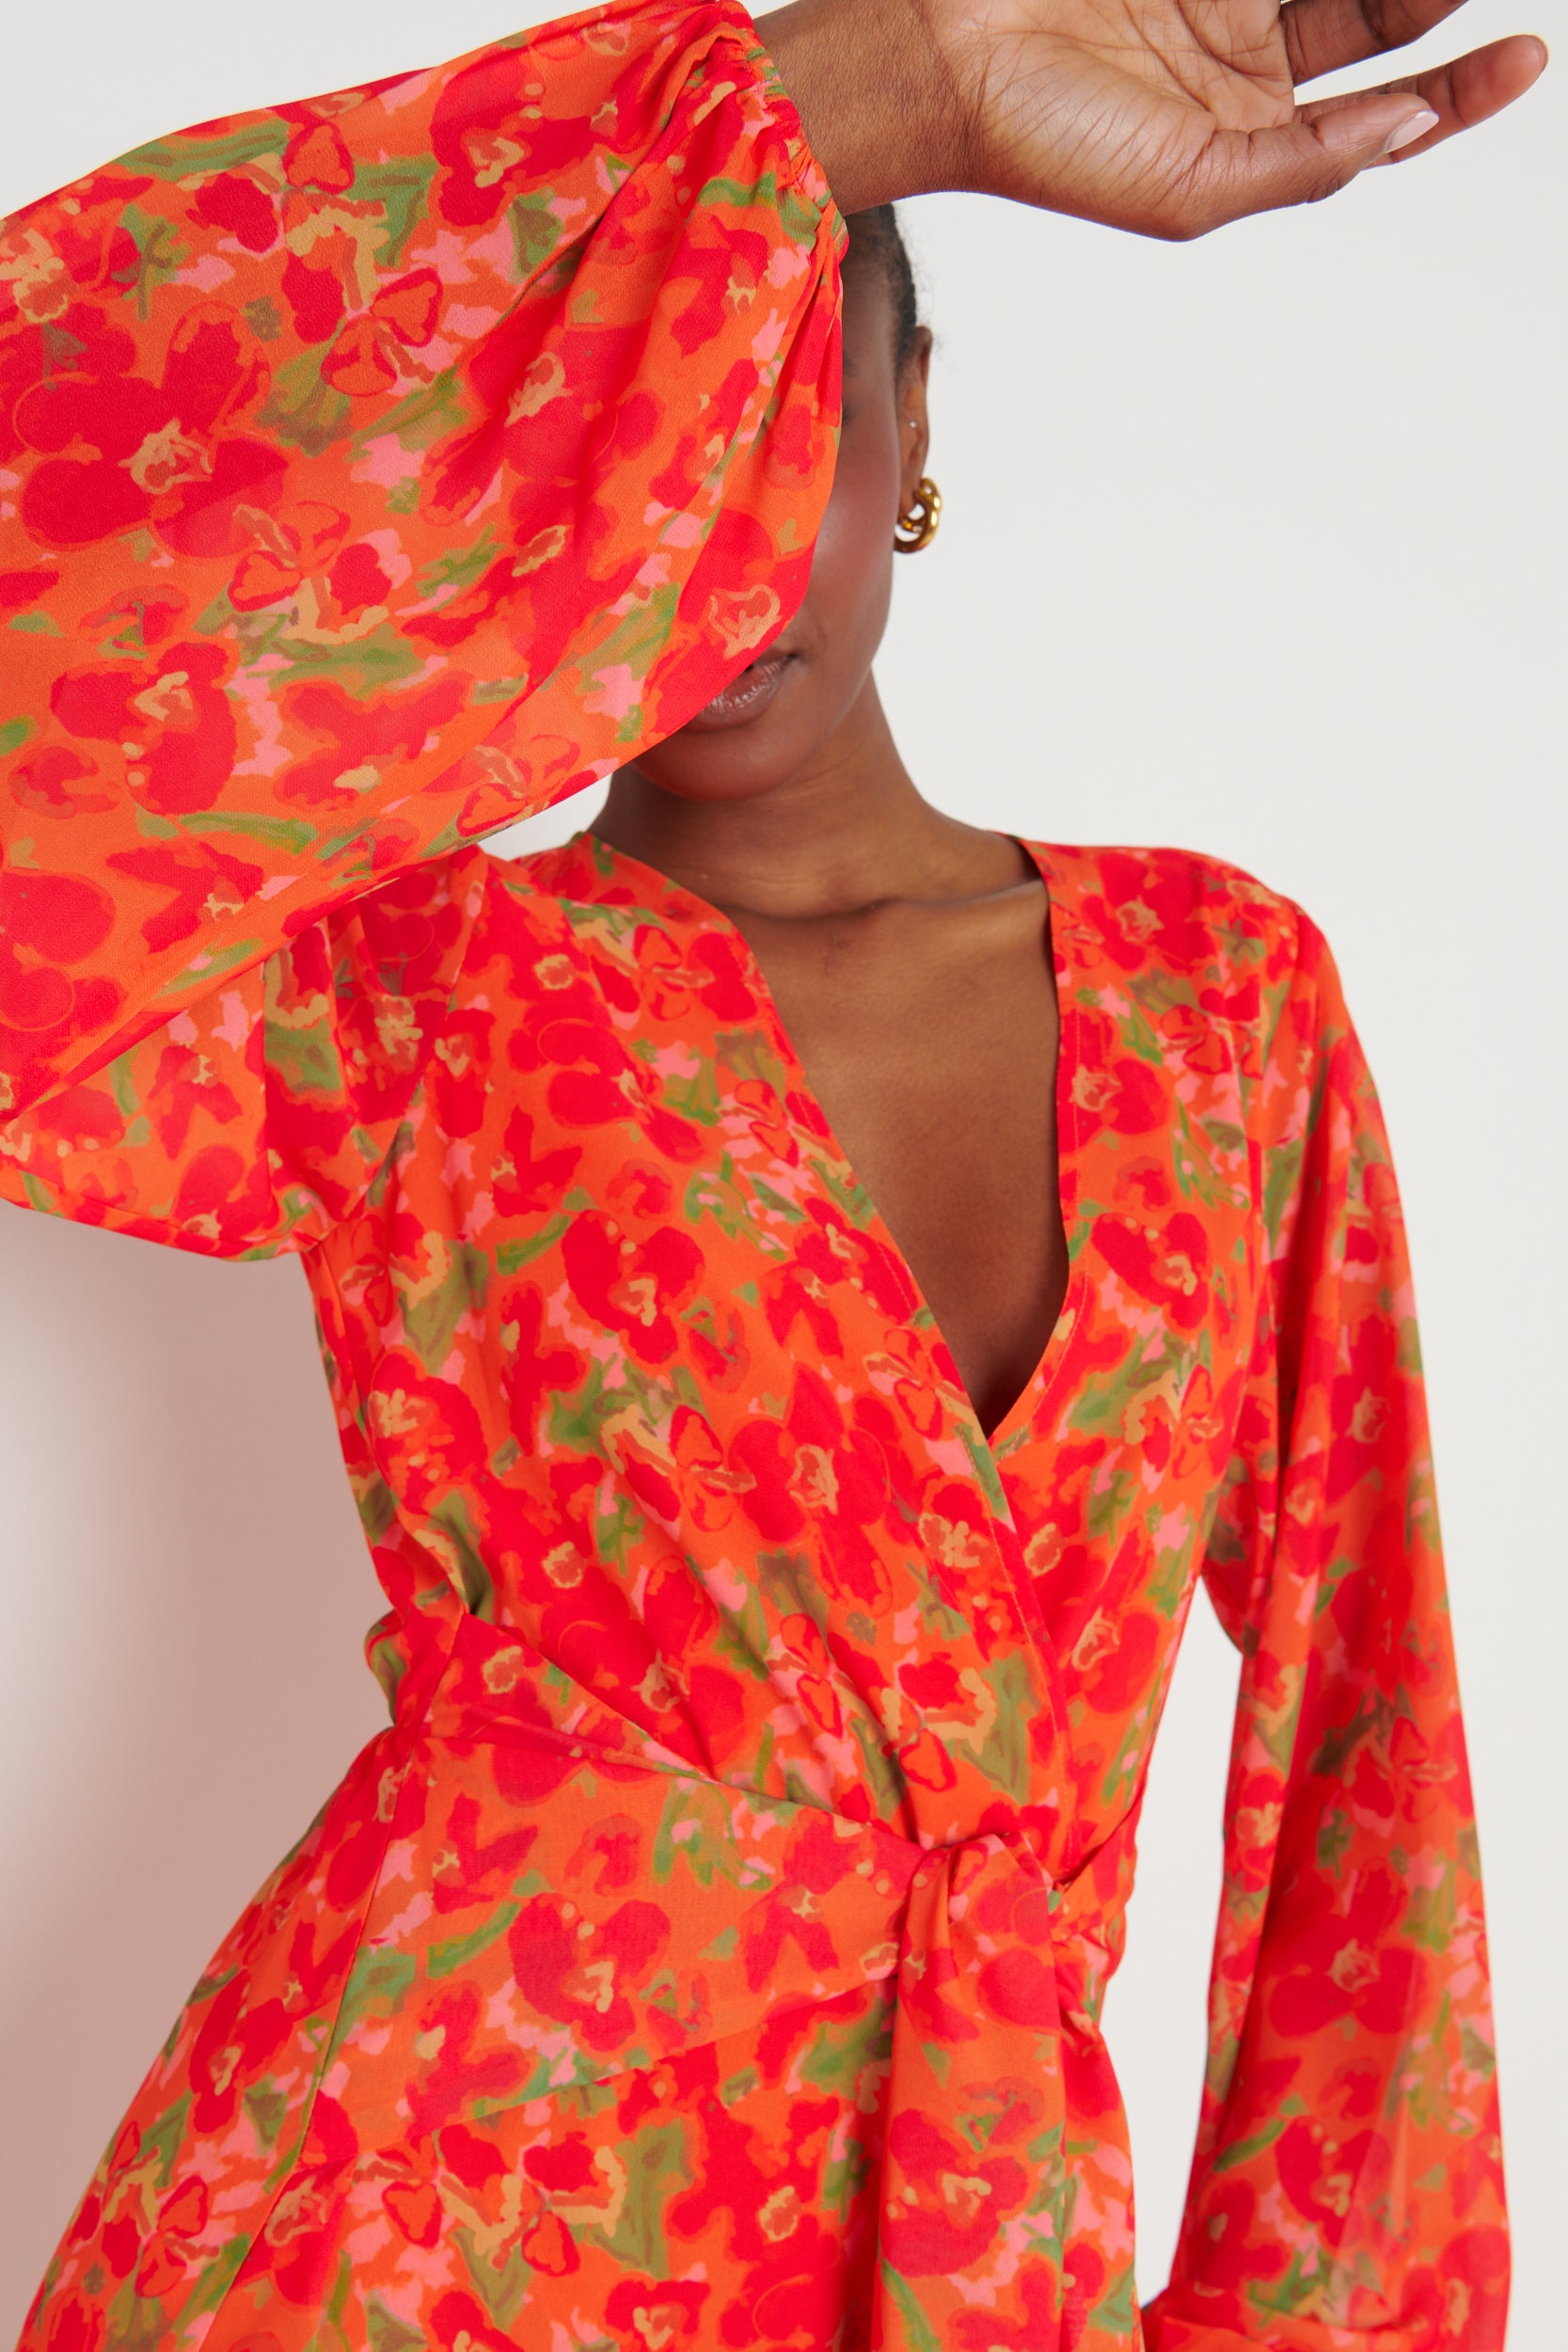 Alexis Knot Drape Dress - Red and Orange Floral